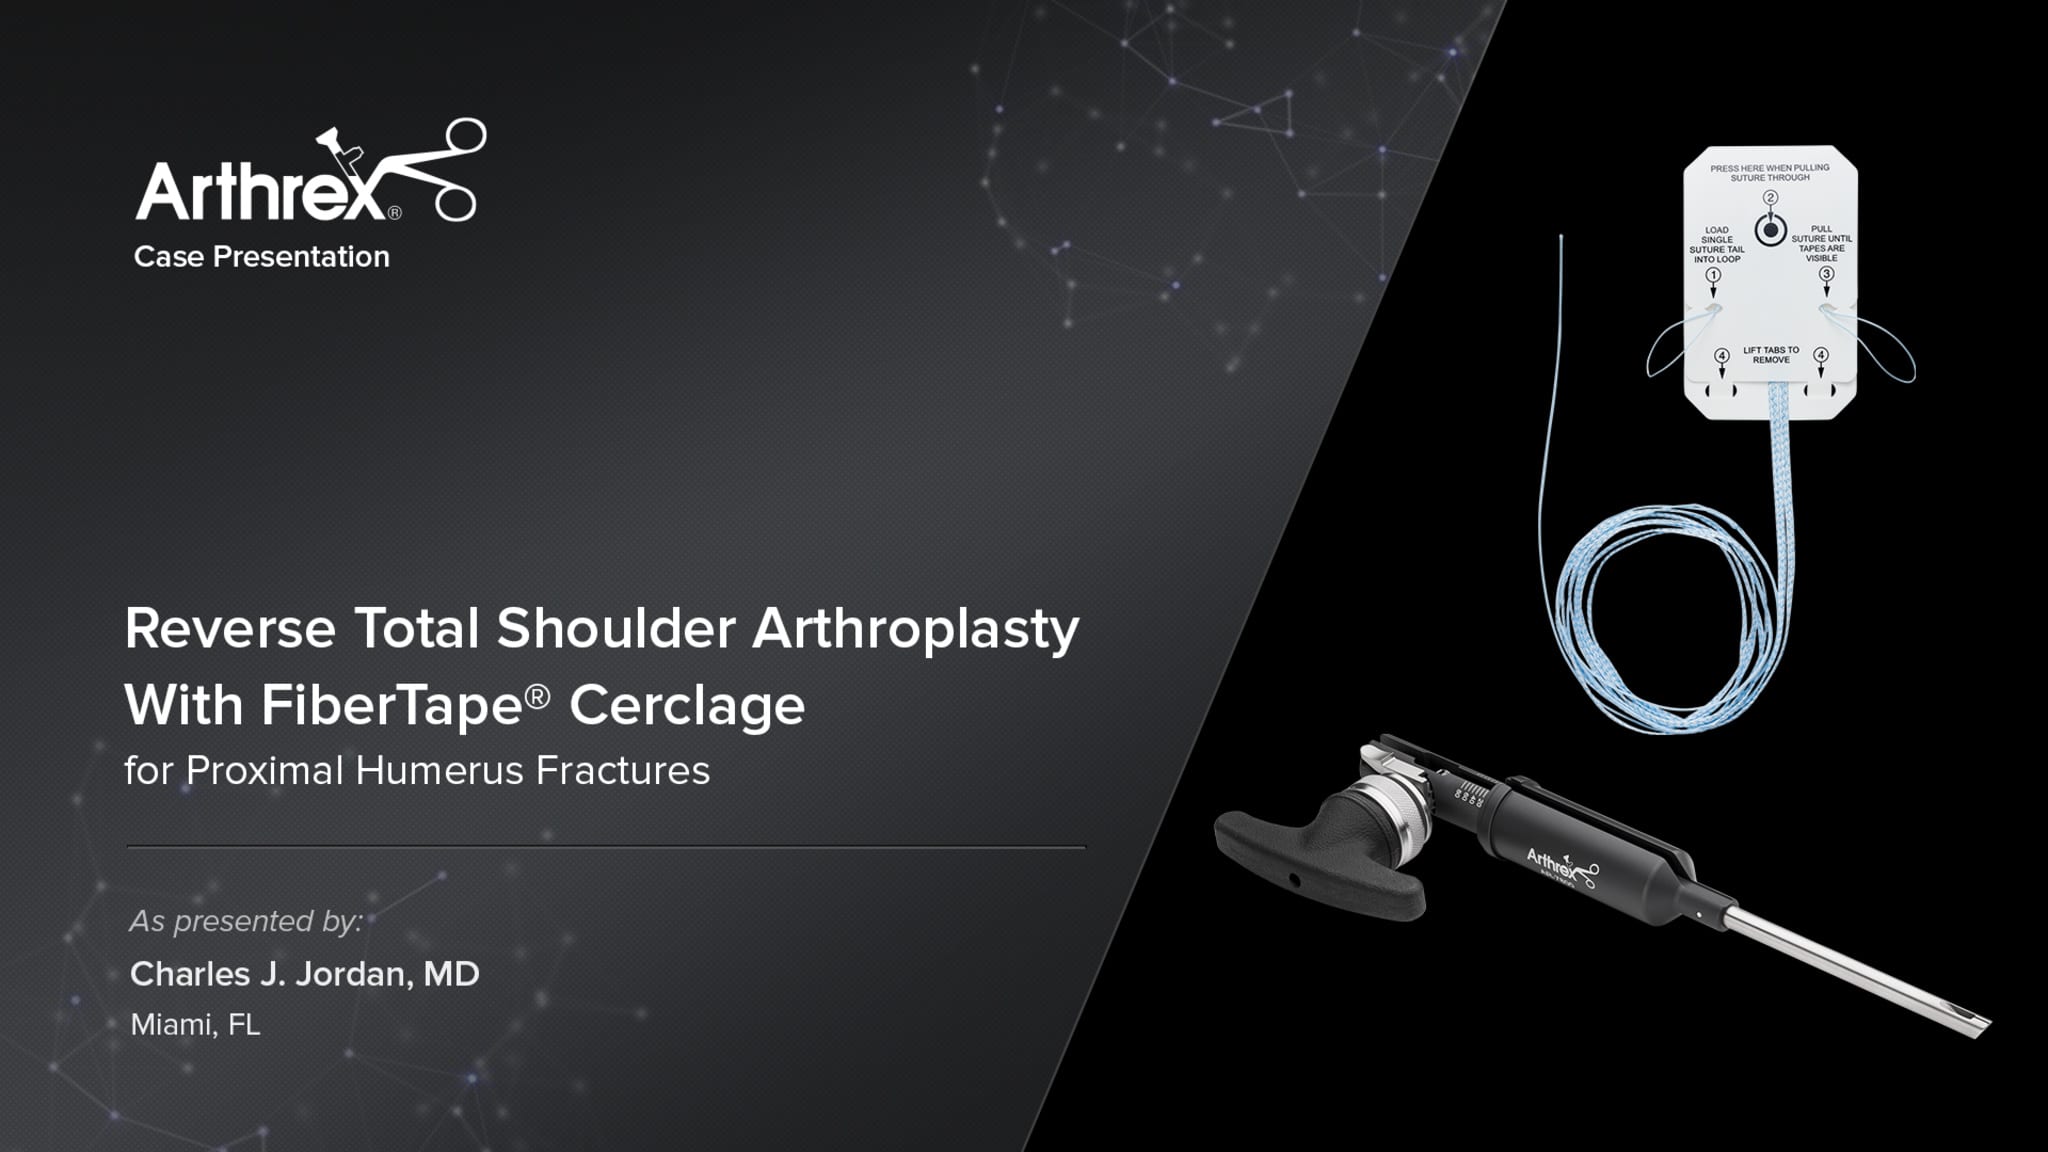 Reverse Total Shoulder Arthroplasty With FiberTape® Cerclage for Proximal Humerus Fractures